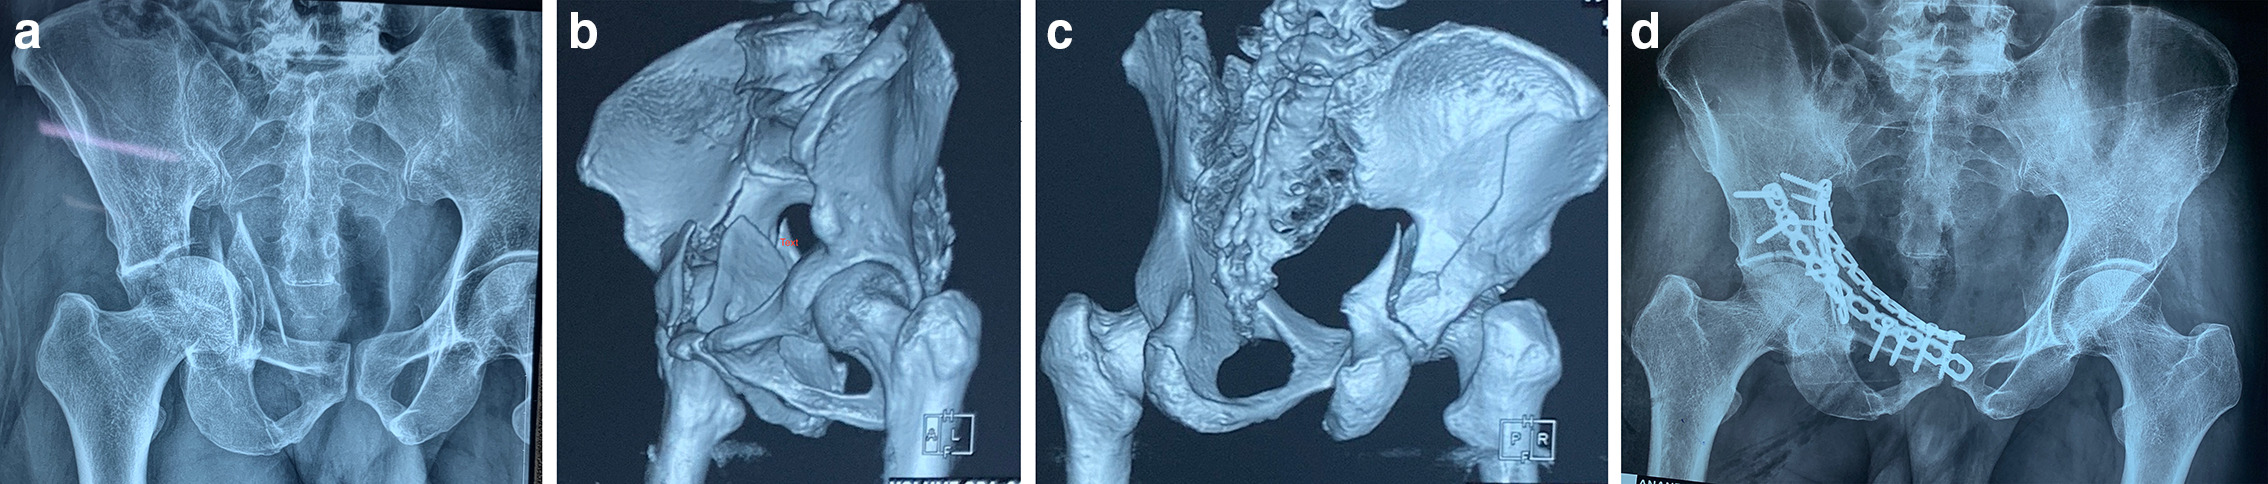 Fig. 4 
            a) Anteroposterior Radiographic view of 55 year-old male showing anterior column posterior hemitransverse (ACPHT) acetabulum fracture with seagull sign and medial subluxation of femoral head. b) 3D CT scan of the same patient with an ACPHT acetabulum fracture showing oblique orientation of posterior column fracture. c) 3D CT scan of the ACPHT acetabulum fracture showing displaced anterior column and medially displaced quadrilateral plate. d) Immediate postoperative radiograph showing anatomical reduction of fracture with vertical posterior column plate, infrapectineal, and suprapectineal plate.
          